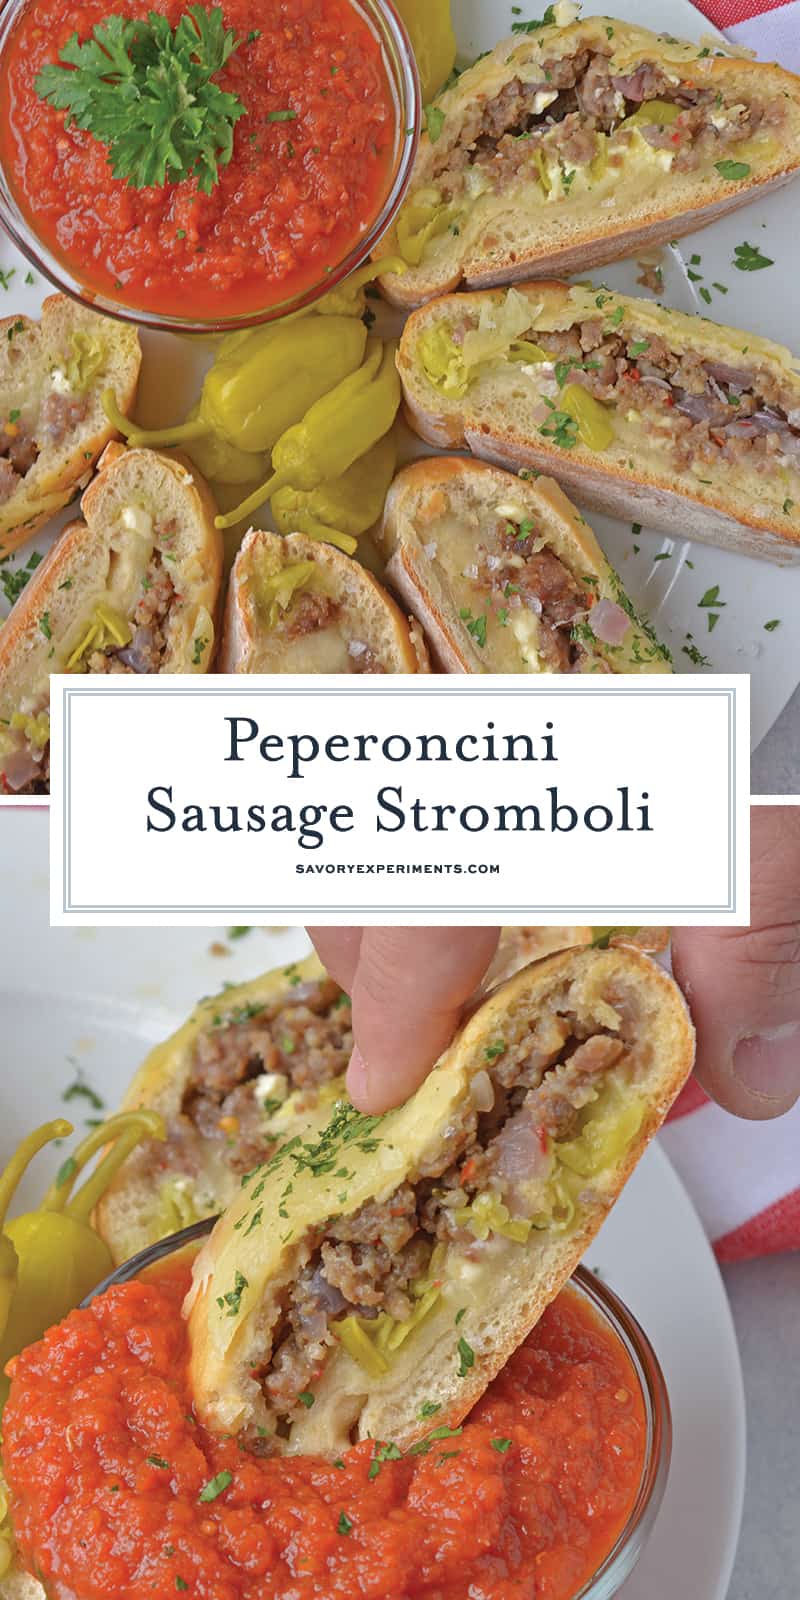 Peperoncini Sausage Stromboli is a crave-worthy, easy dinner recipe that your whole family will enjoy. Check out all the ways to make this dish your new family favorite. #strombolirecipes www.savoryexperiments.com 